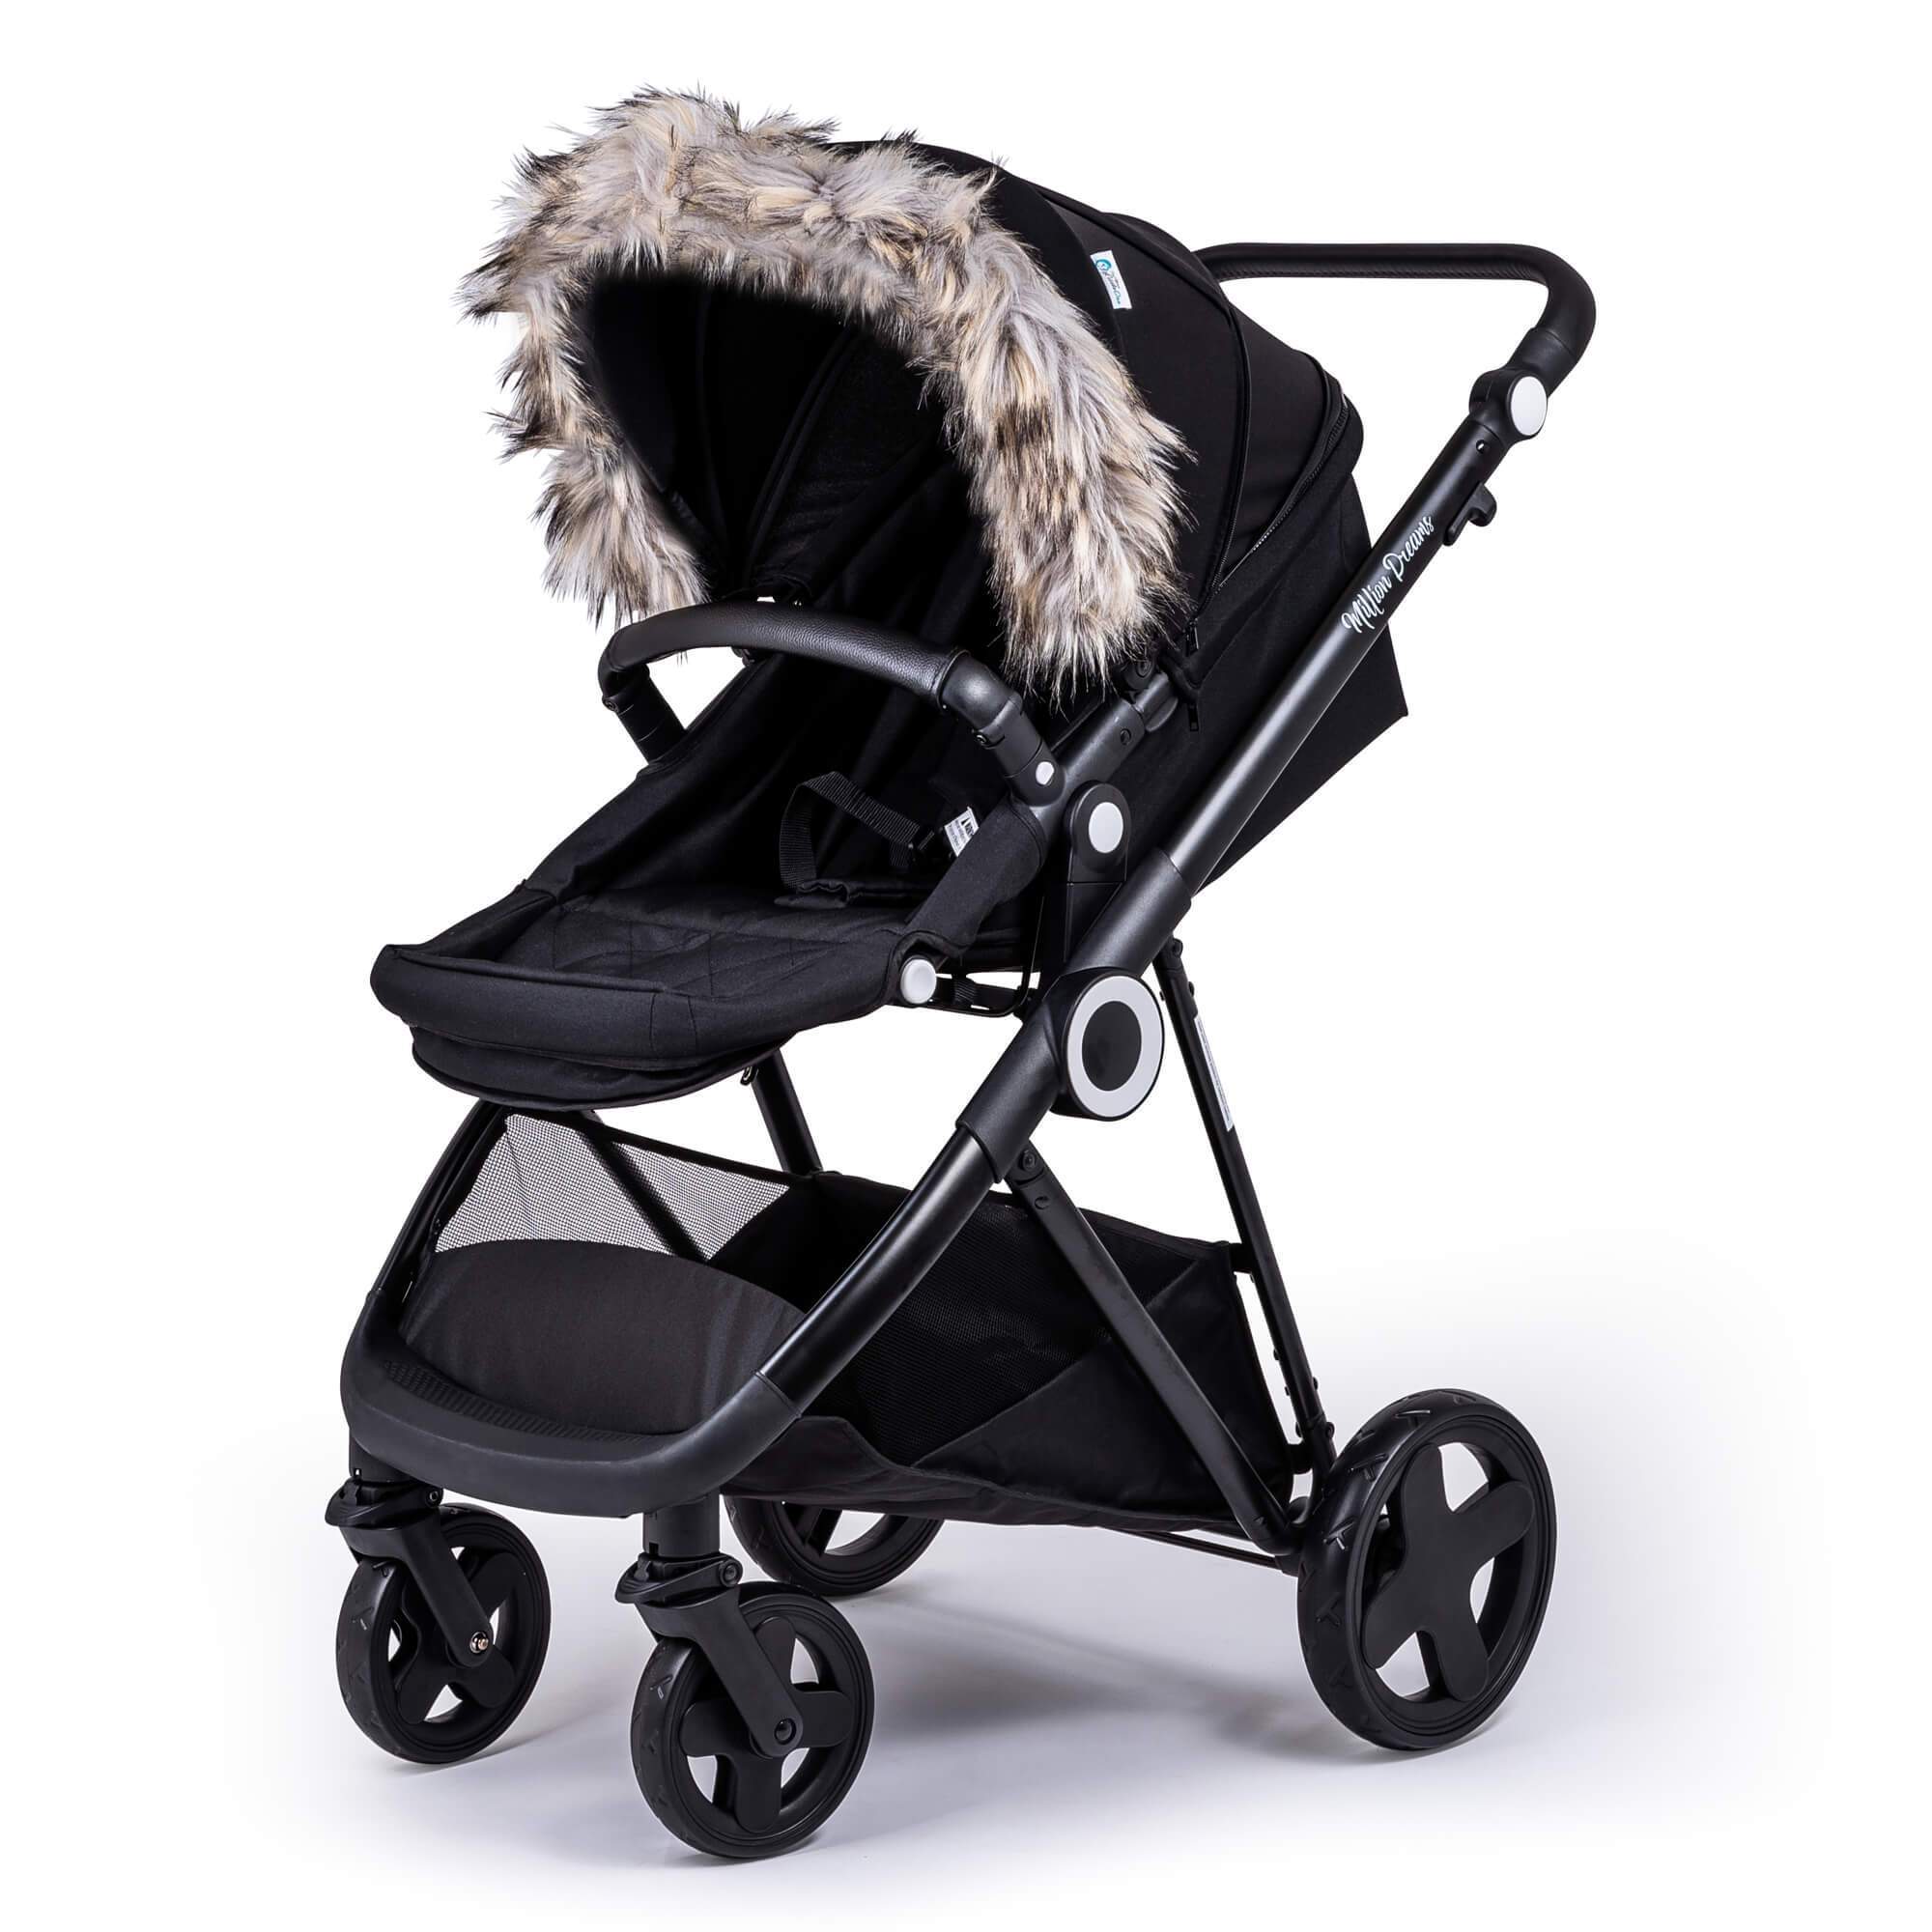 Pram Fur Hood Trim Attachment for Pushchair Compatible with Joolz - Light Grey / Fits All Models | For Your Little One